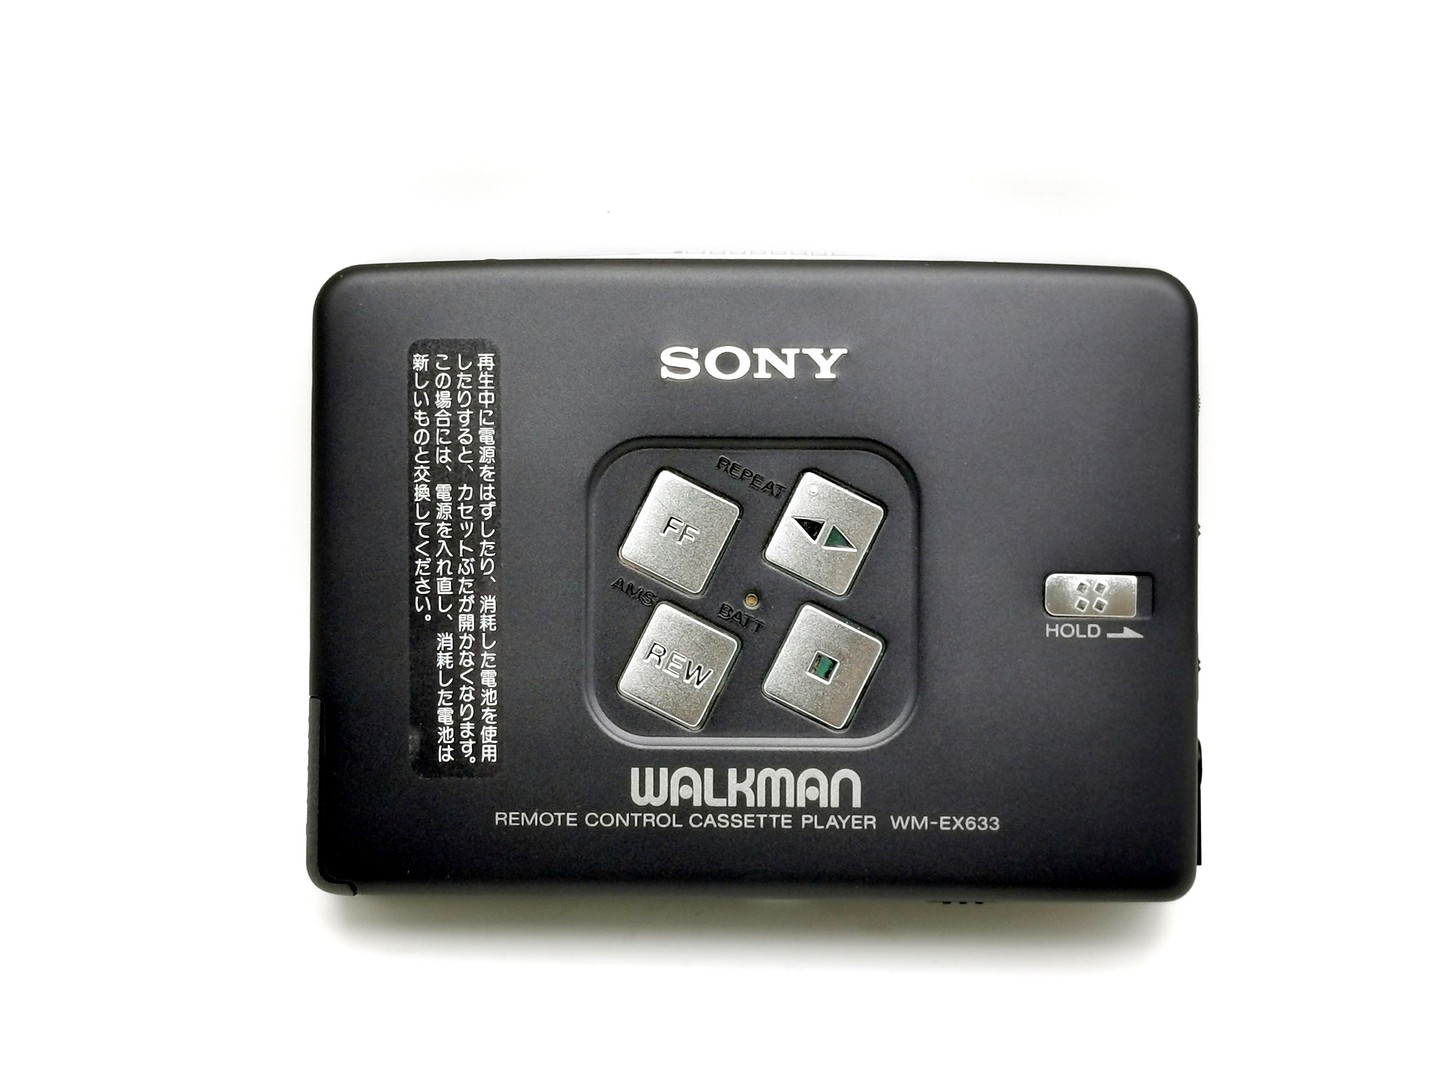 Sony_WM-EX633_-_Rear_with_buttons_and_sticker_ig-boxedwalkman